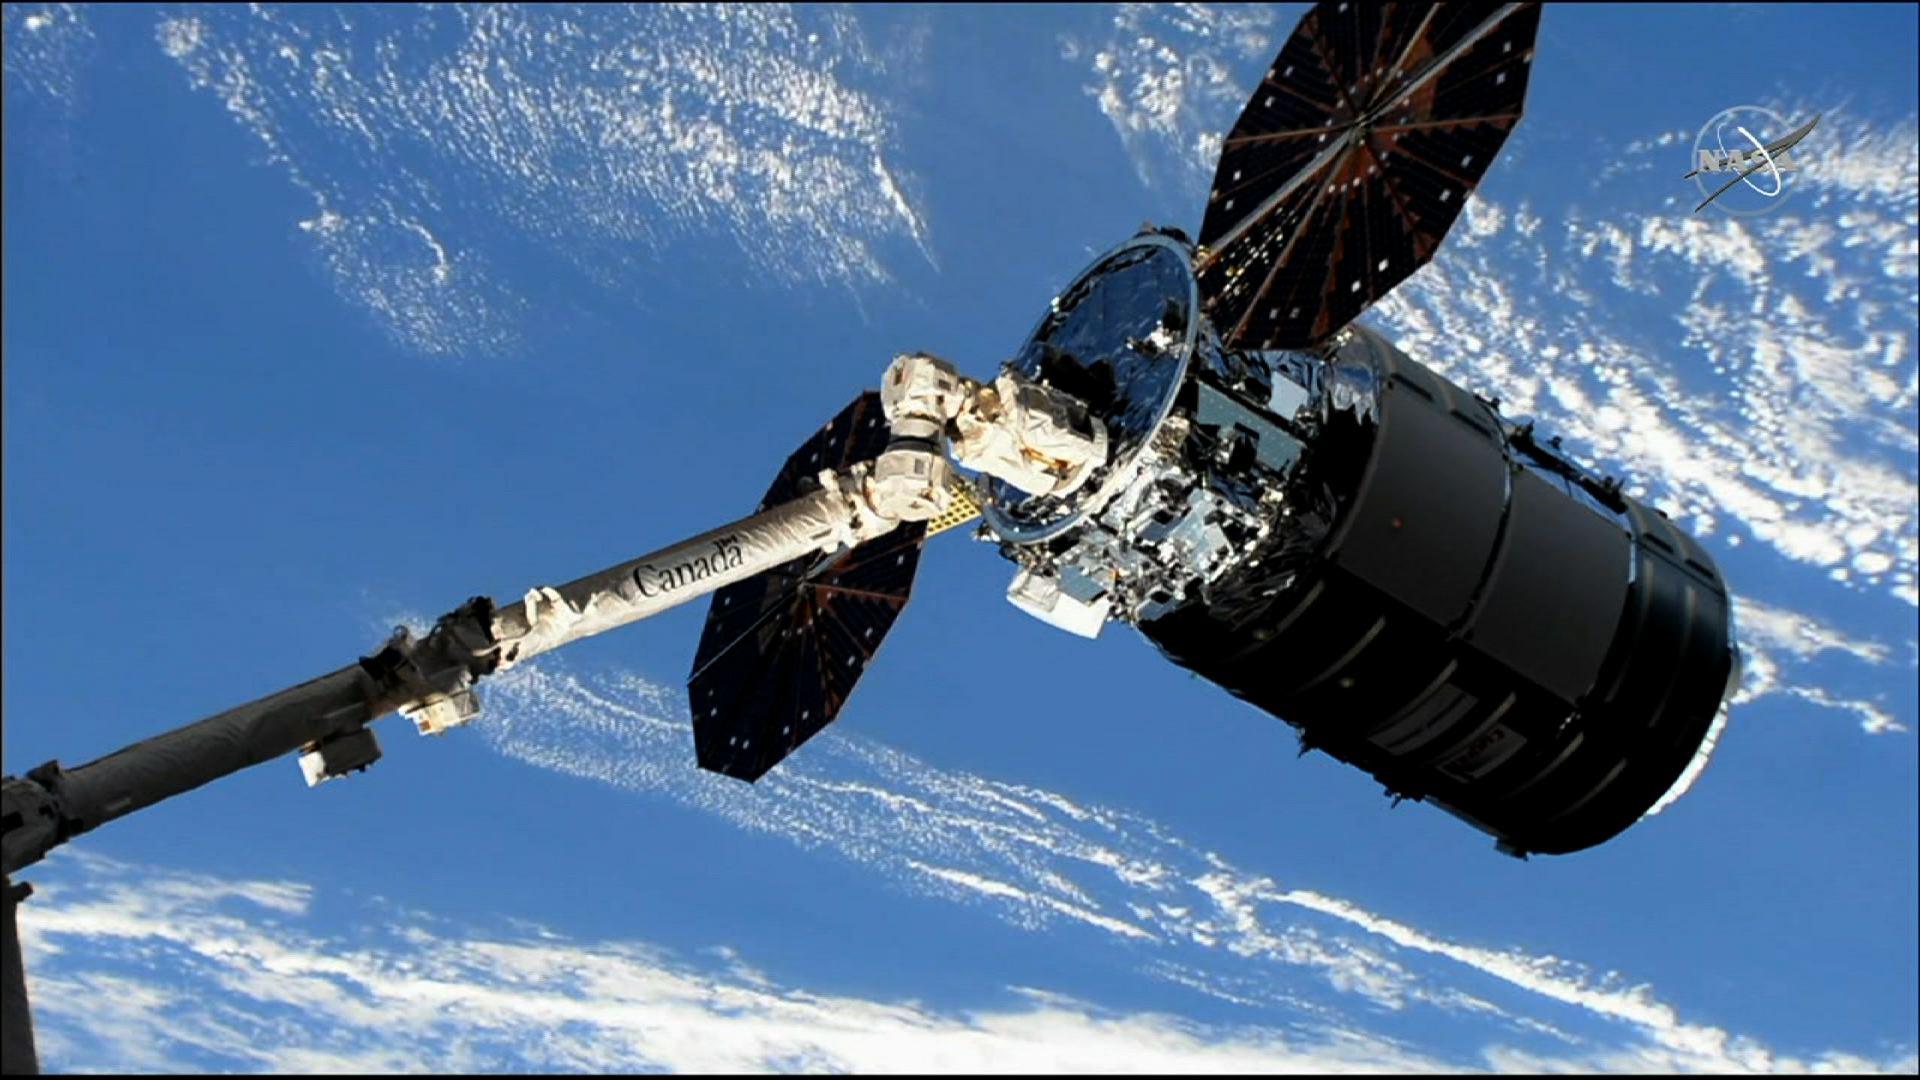 Cargo capsule reaches International Space Station